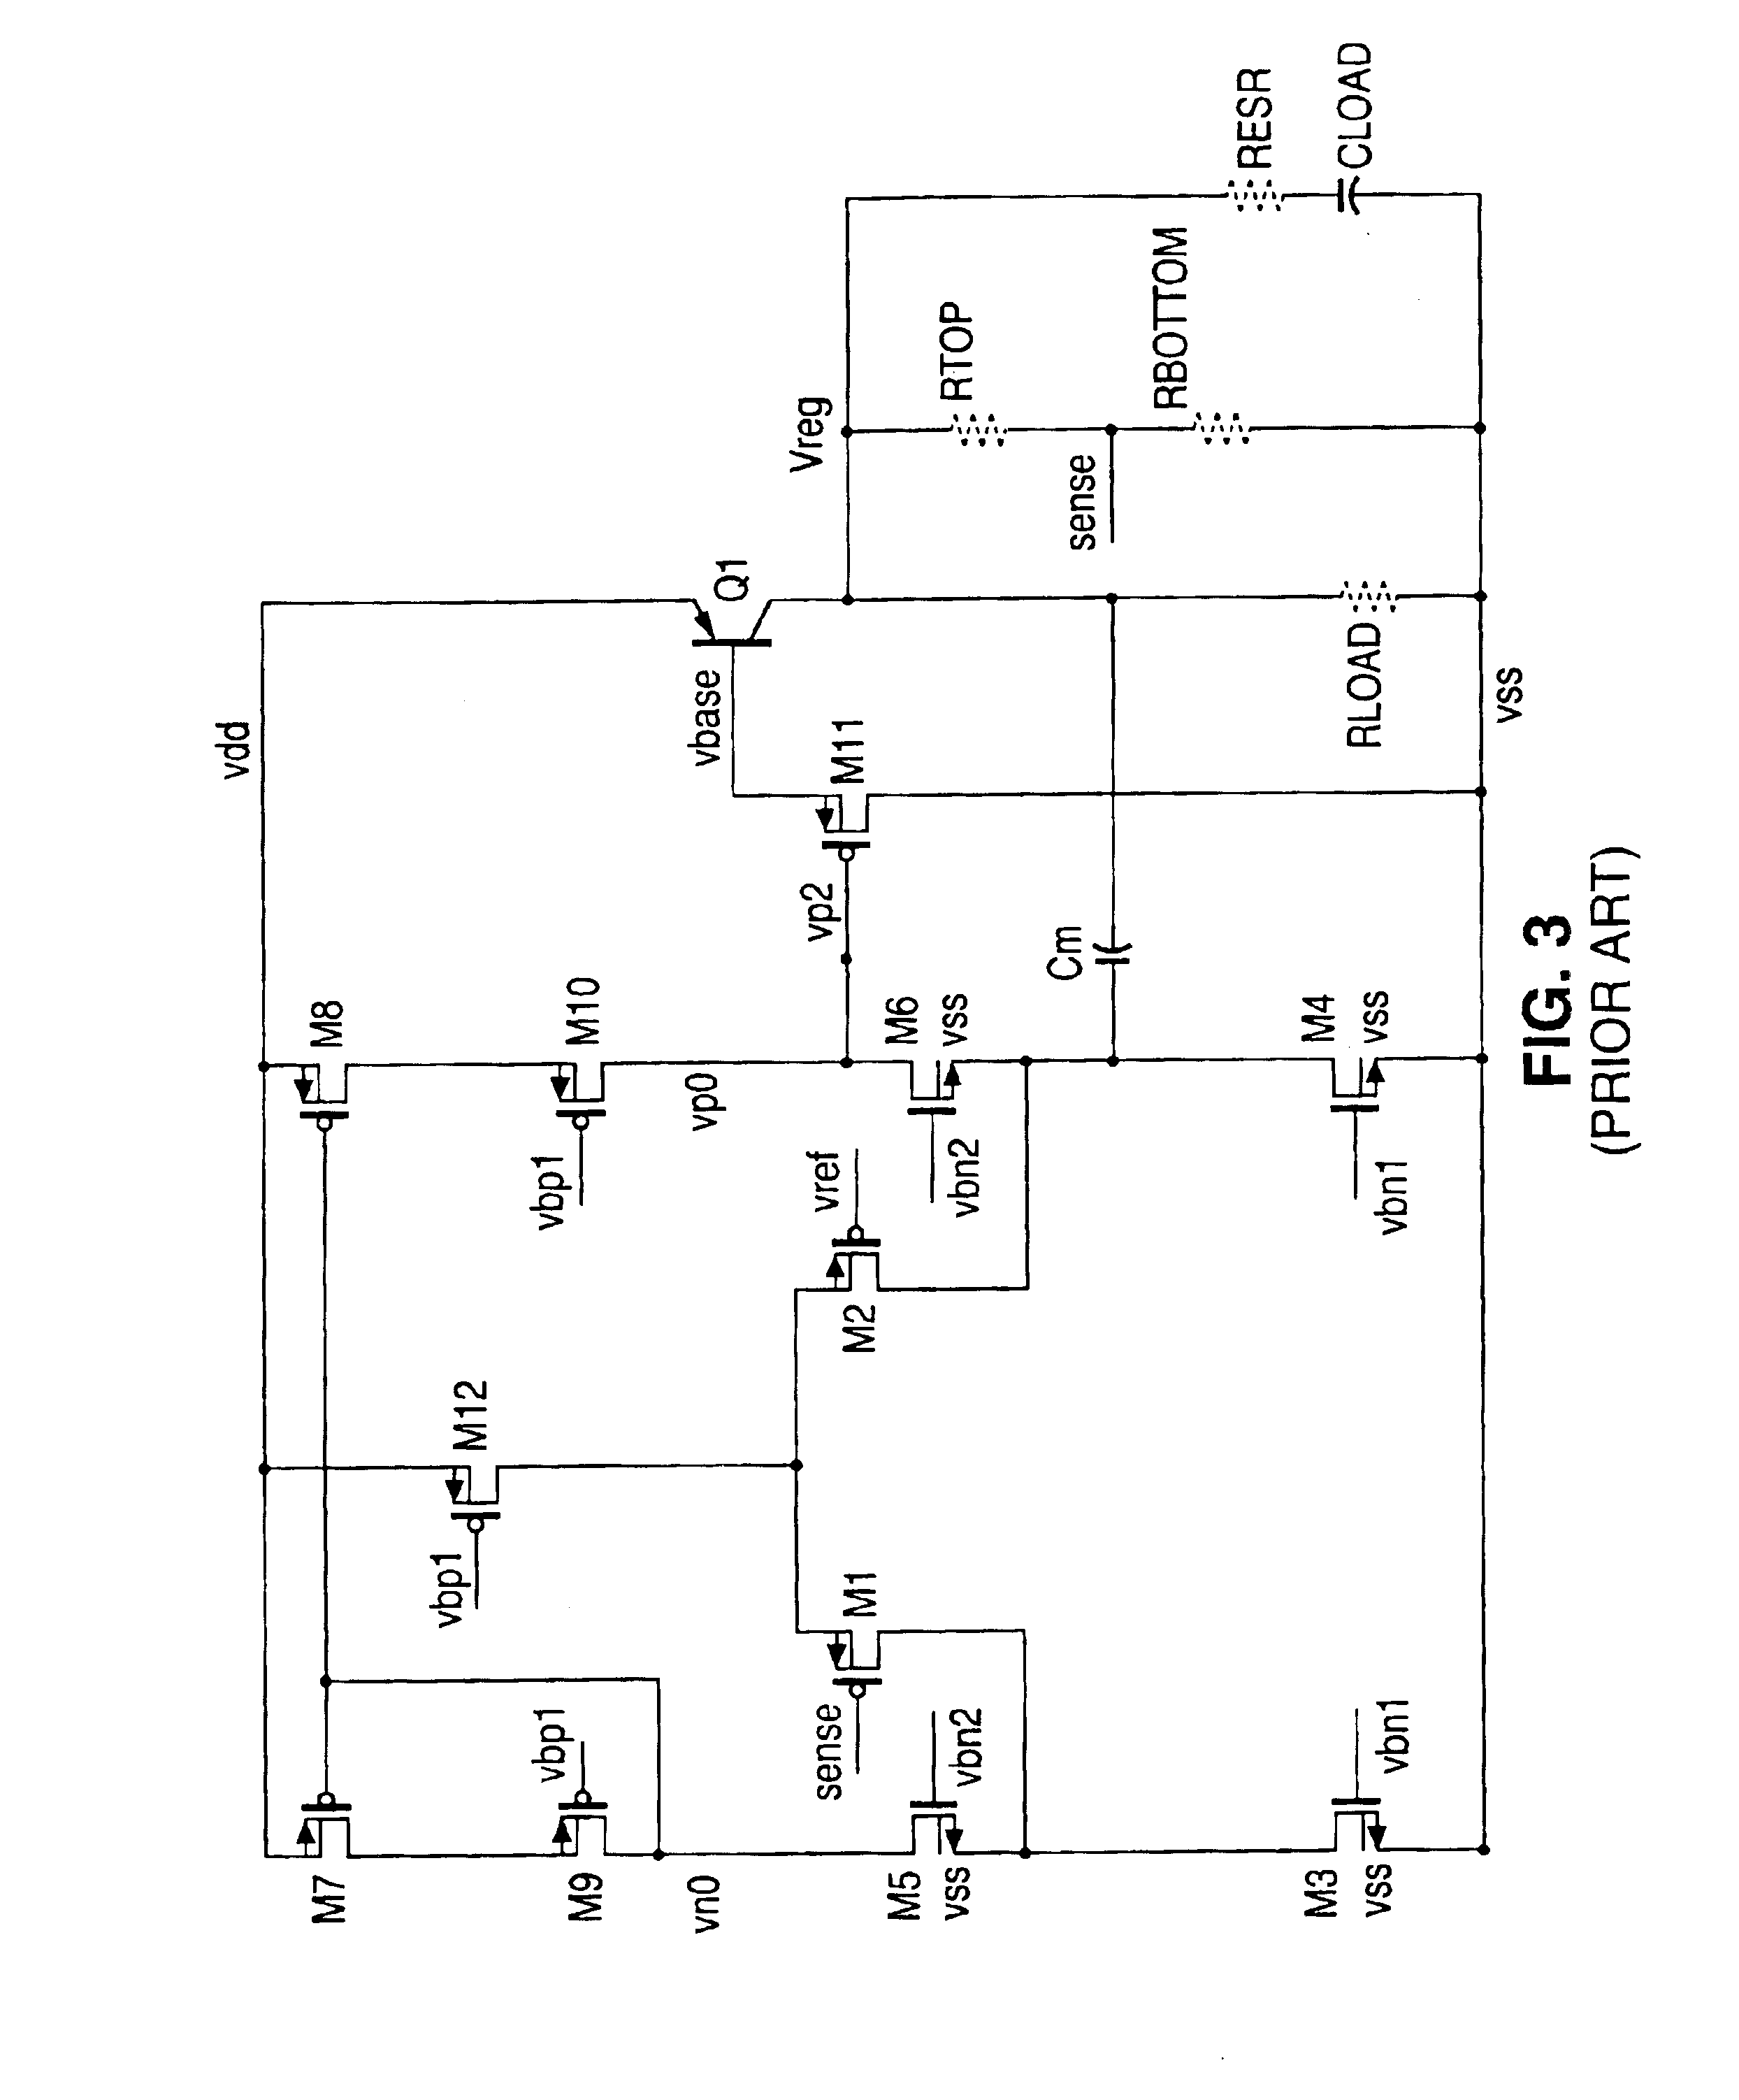 Amplifier with miller-effect compensation for use in closed loop system such as low dropout voltage regulator